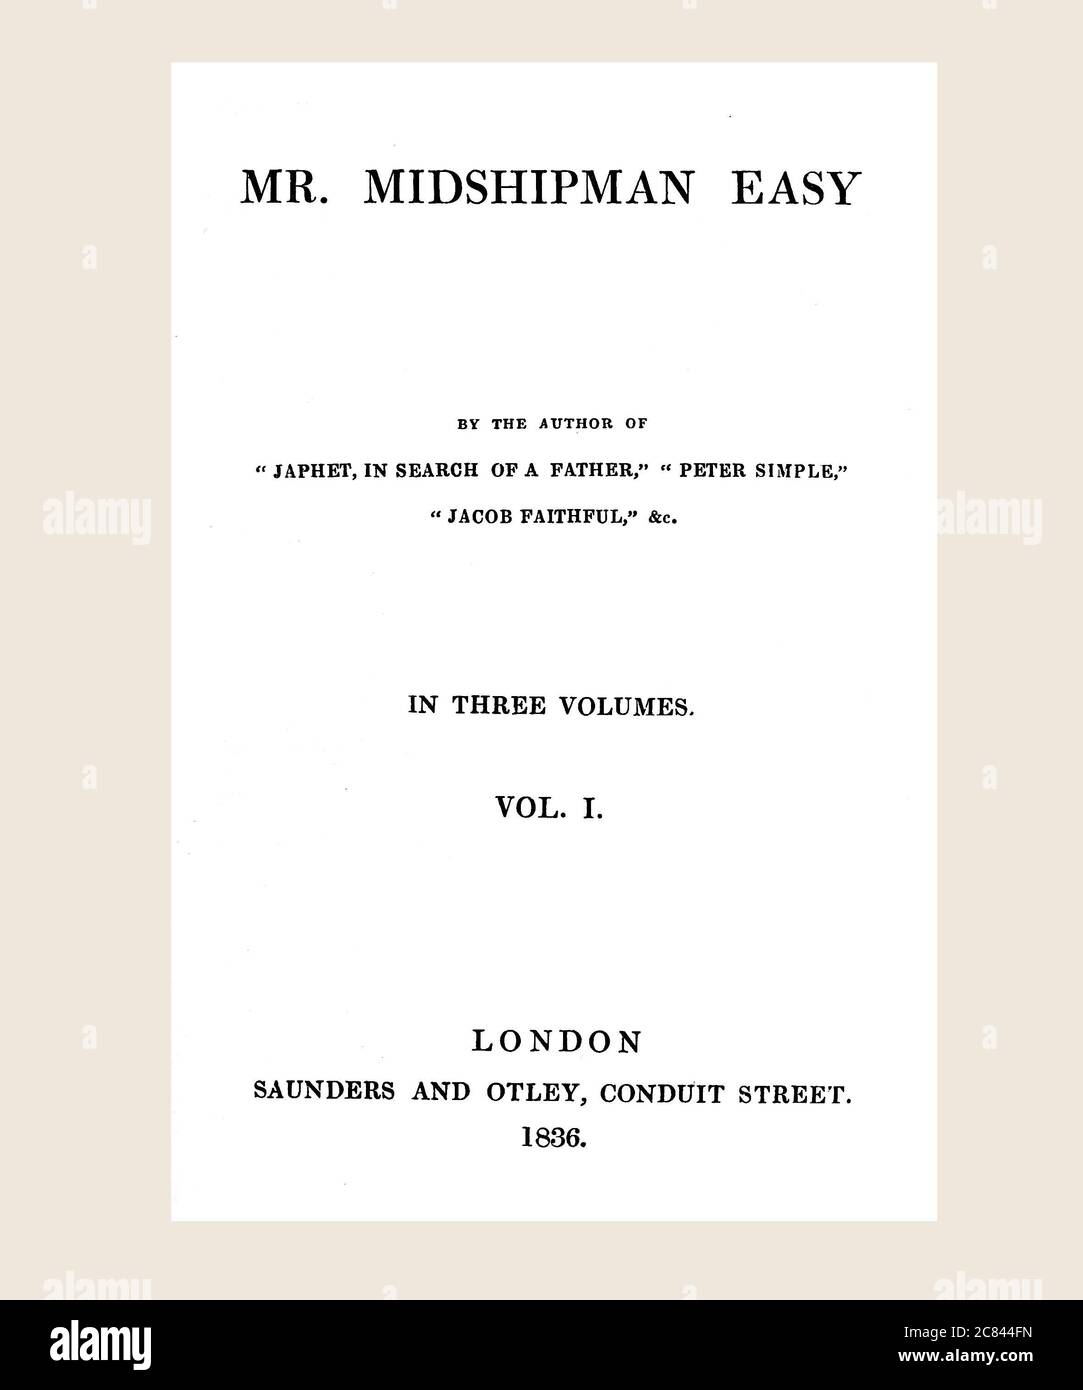 Captain F Marryat Mr. Midshipman Easy vol.1 First Edition Title Page Refreshed and Reset Stock Photo